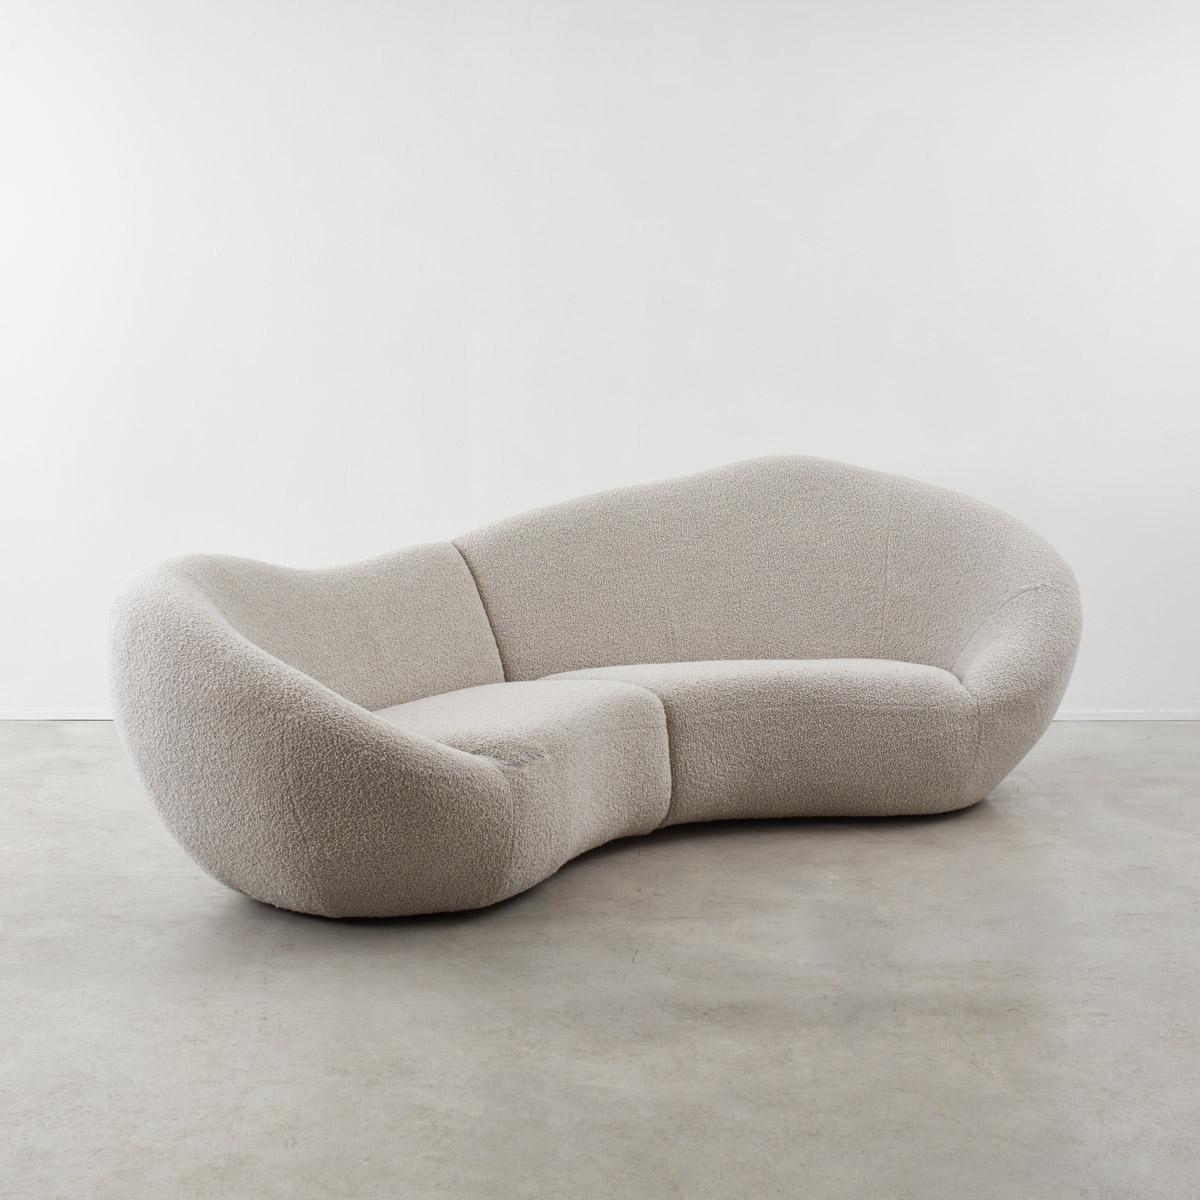 Dramatically sweeping round to envelop the sitter, this late twentieth century curved sofa has an organic form, like that of a bean. The back slopes up asymmetrically for a more supportive back rest on one side. It is formed of two parts and joined